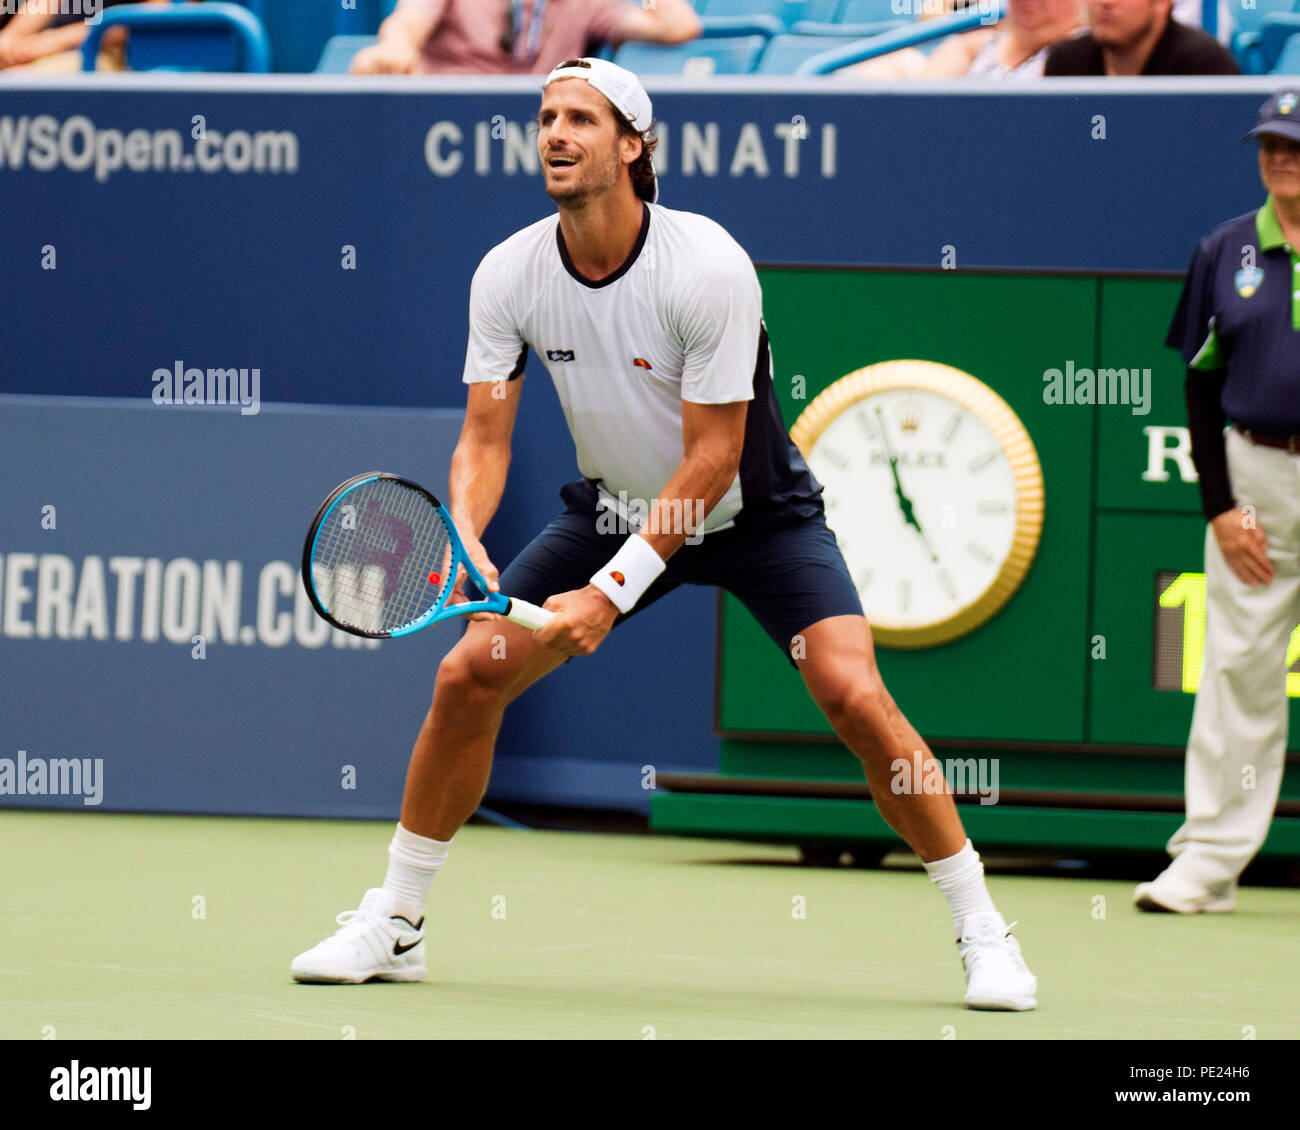 Ohio, USA. August 11, 2018: Feliciano Lopez ( ESP) readies himself against Marcos Baghdatis (CYP) at the Western Southern Open in Mason, Ohio, USA. Brent Clark/Alamy Live News Stock Photo